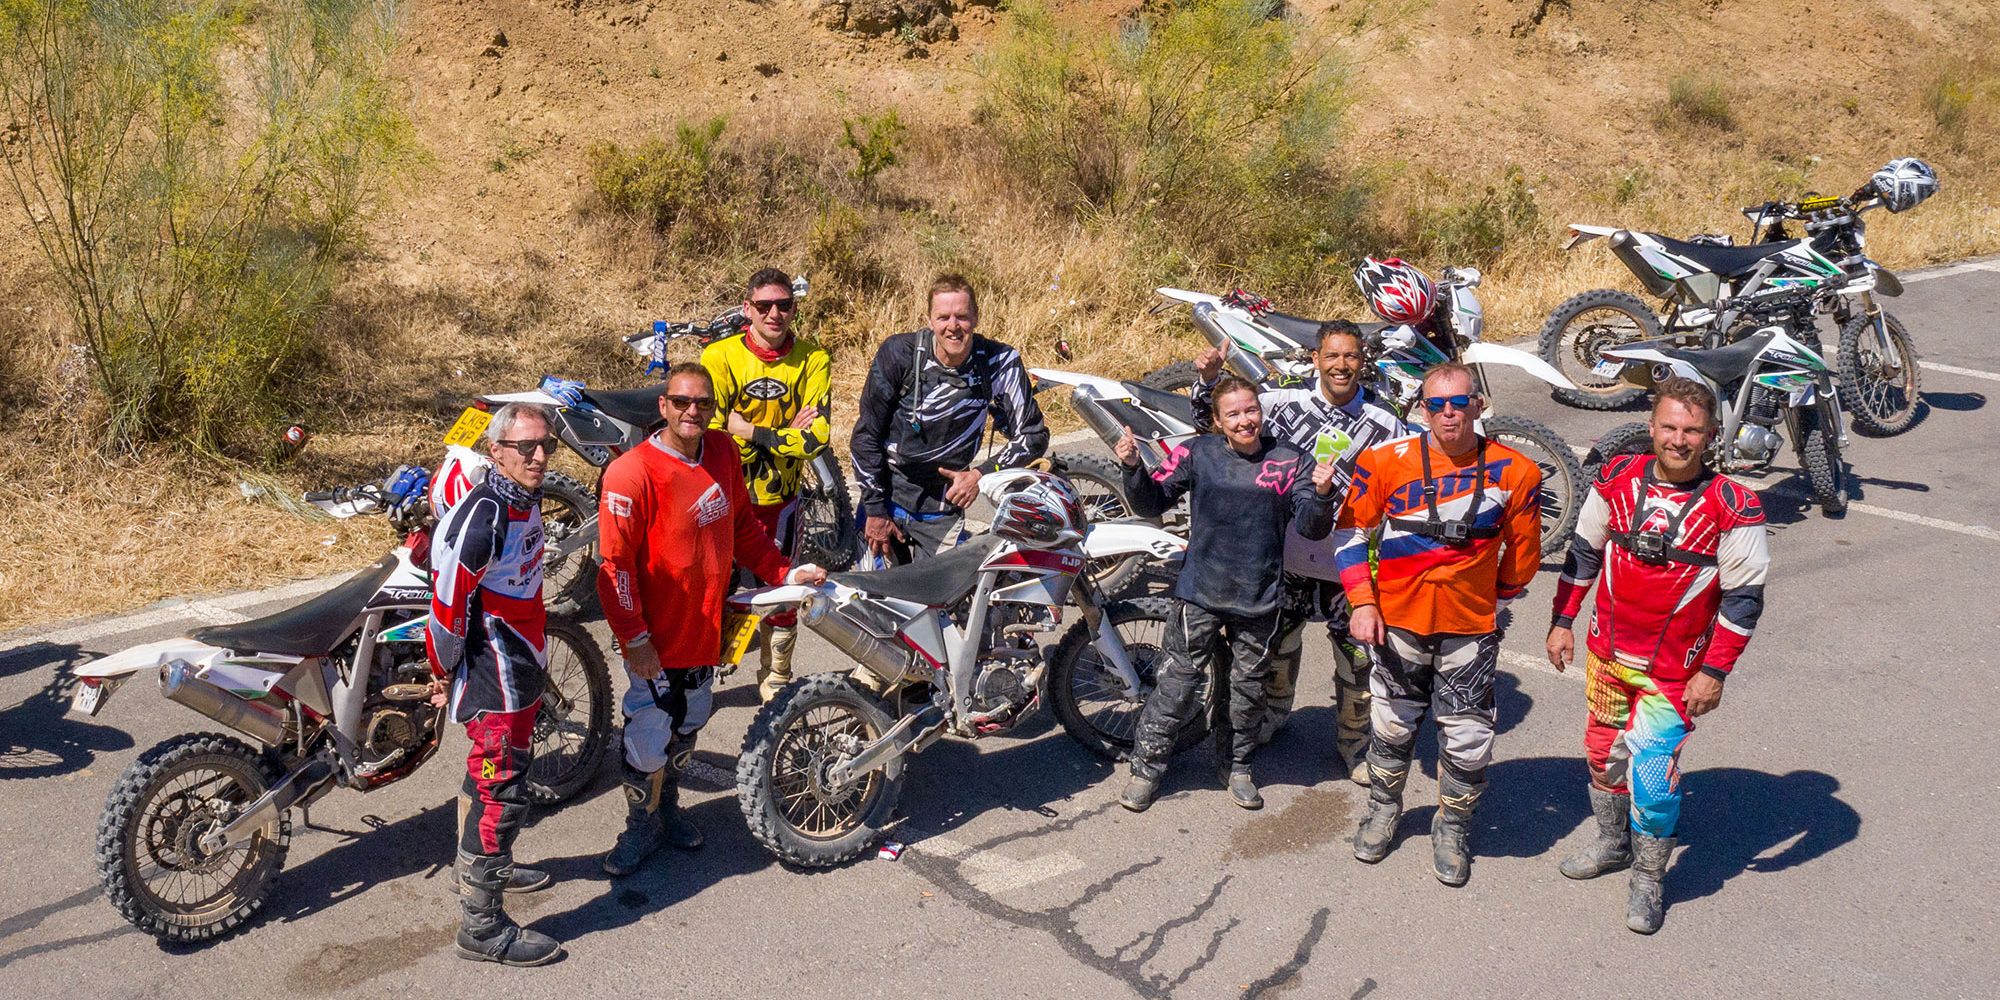 The best off-road motorcycle tours in Spain